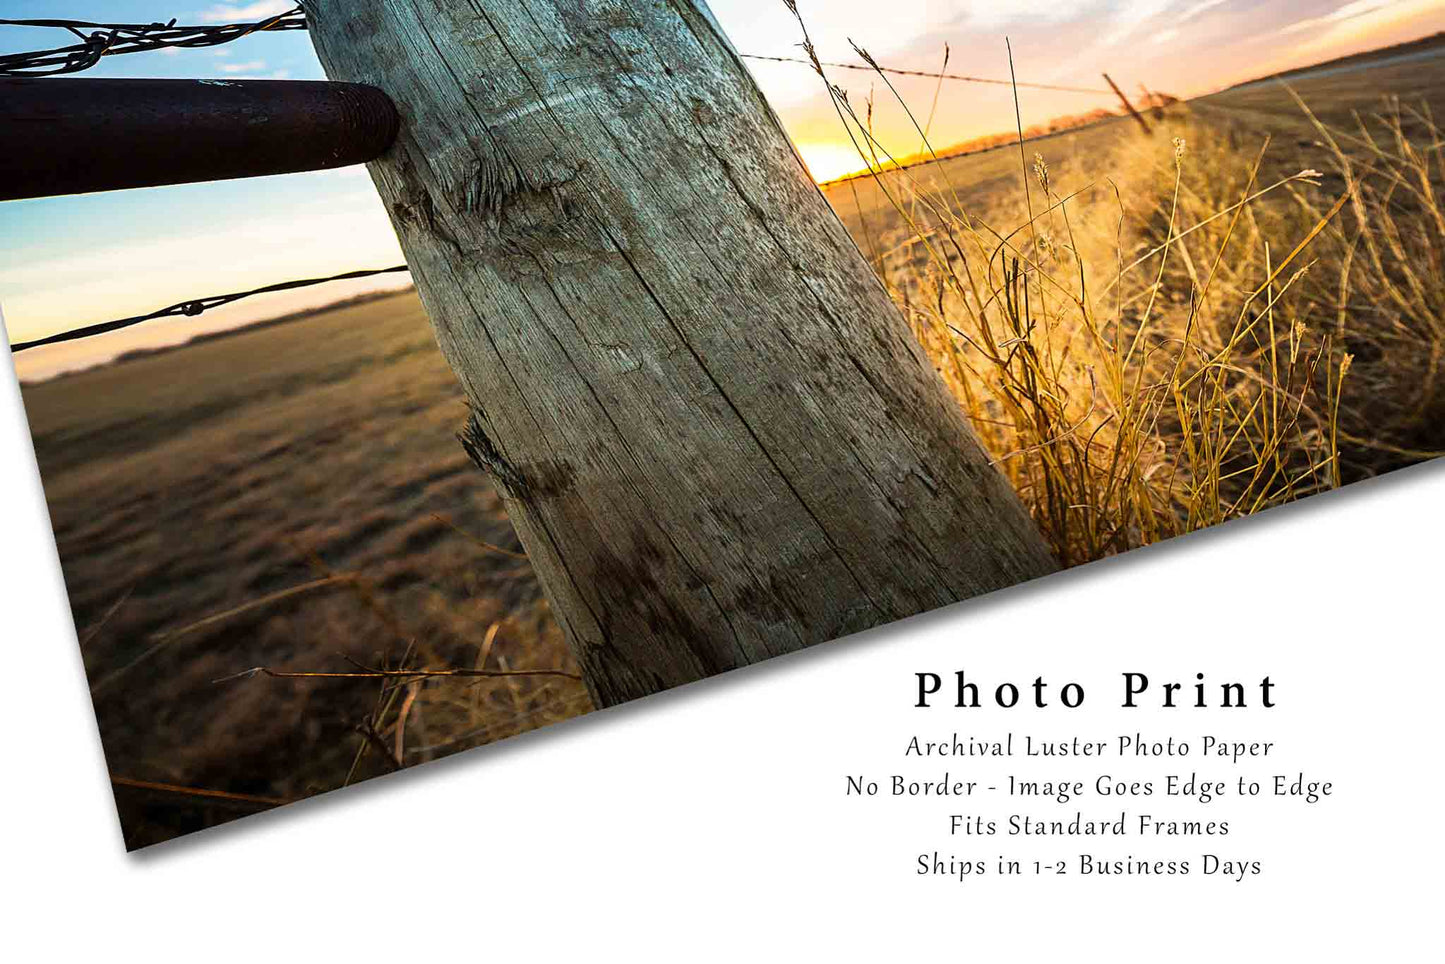 Fence Post Photography Print | Sunset Picture | Country Wall Art | Farm and Ranch Photo | Western Decor | Not Framed